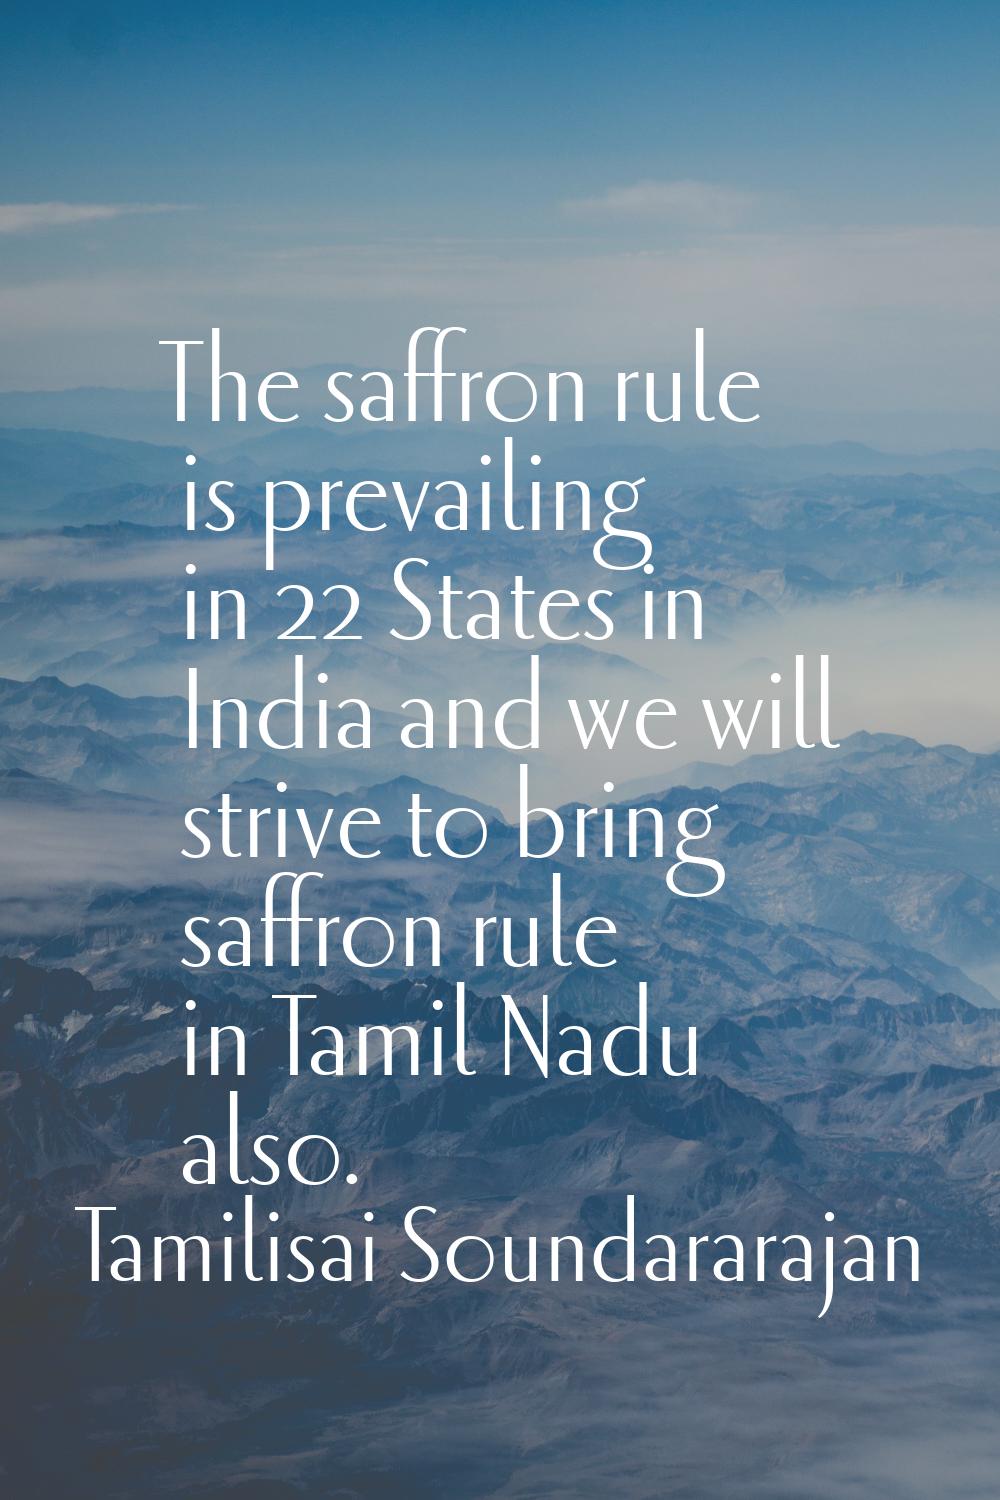 The saffron rule is prevailing in 22 States in India and we will strive to bring saffron rule in Ta